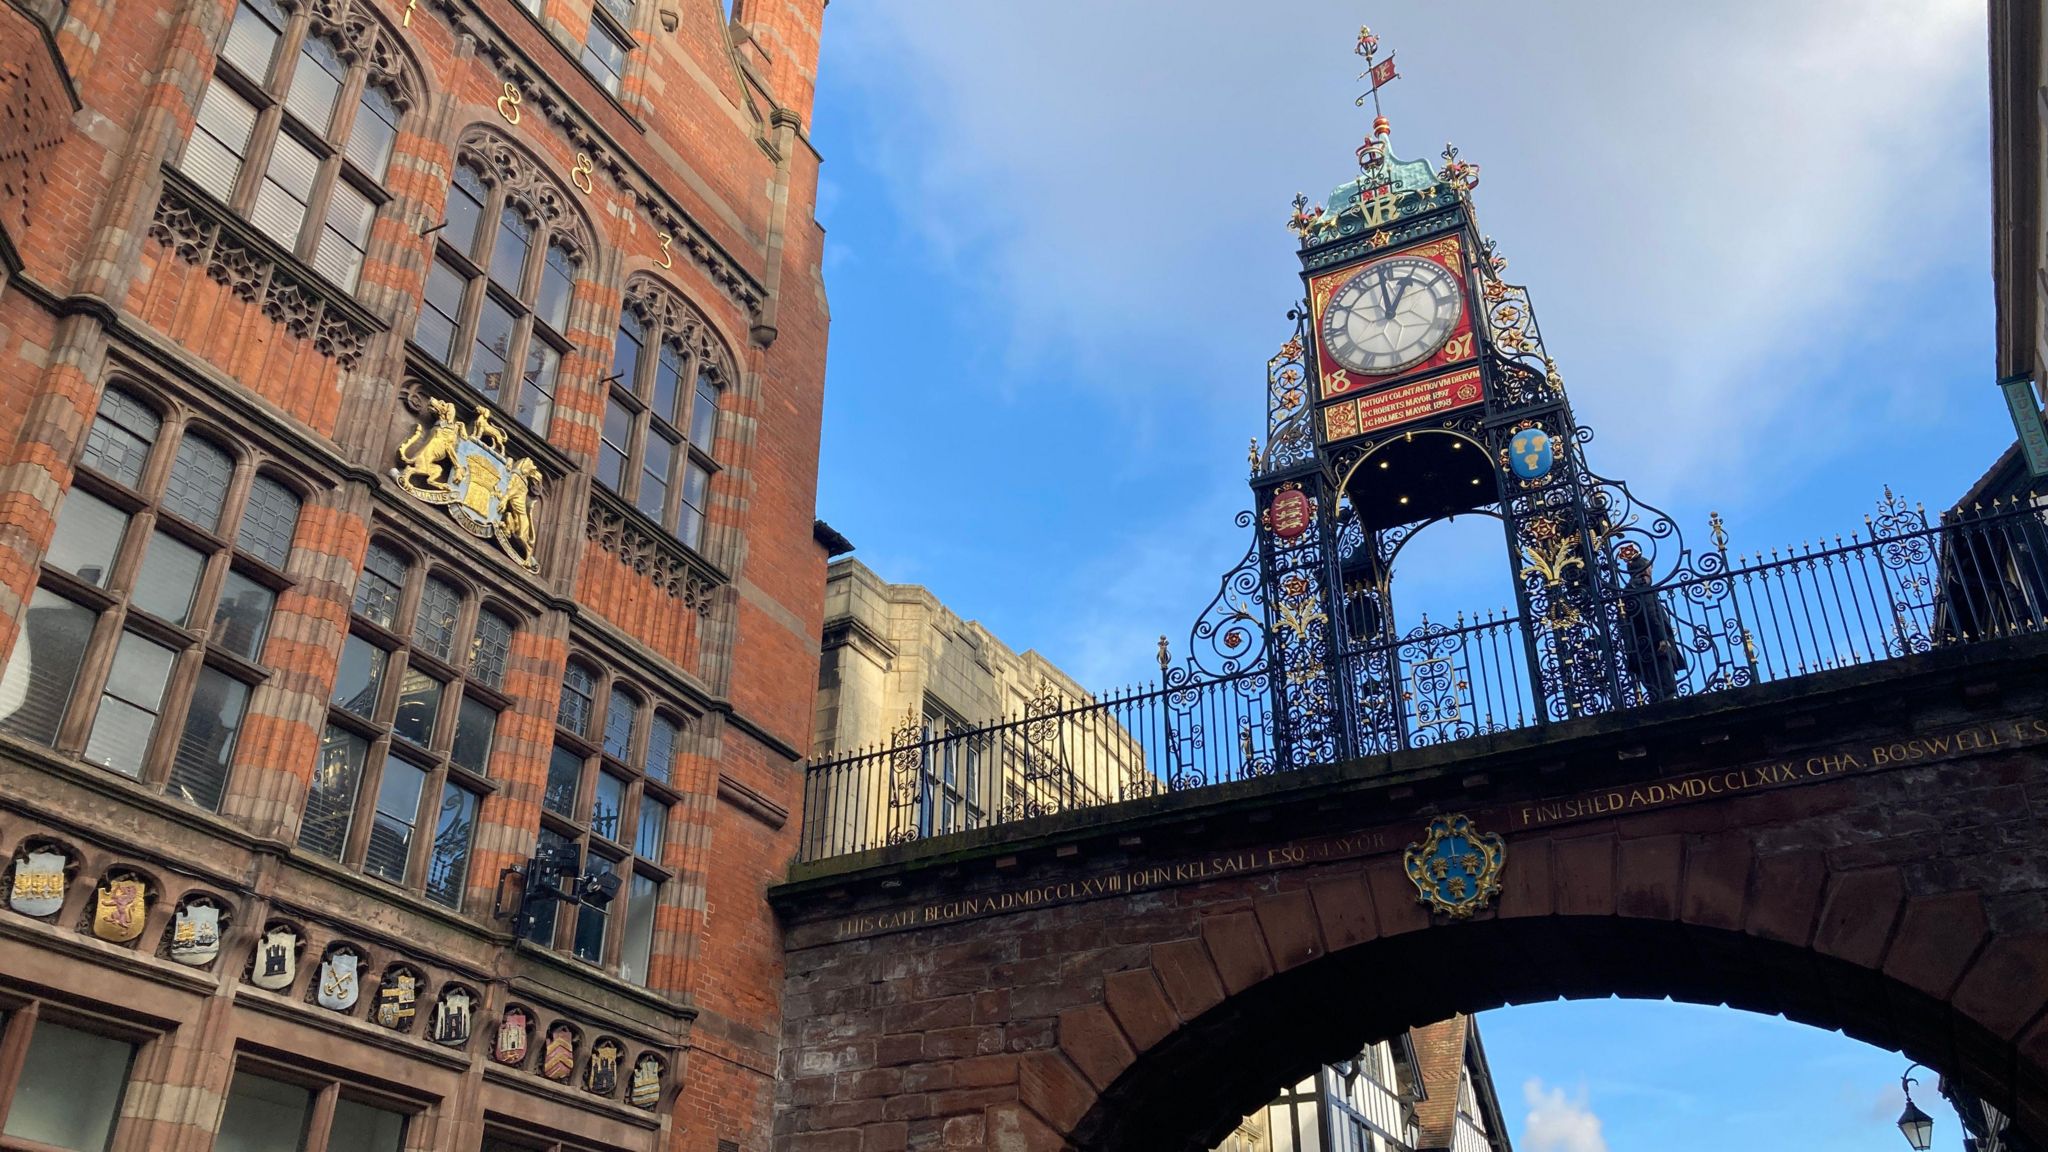 Eastgate Clock in Chester city centre